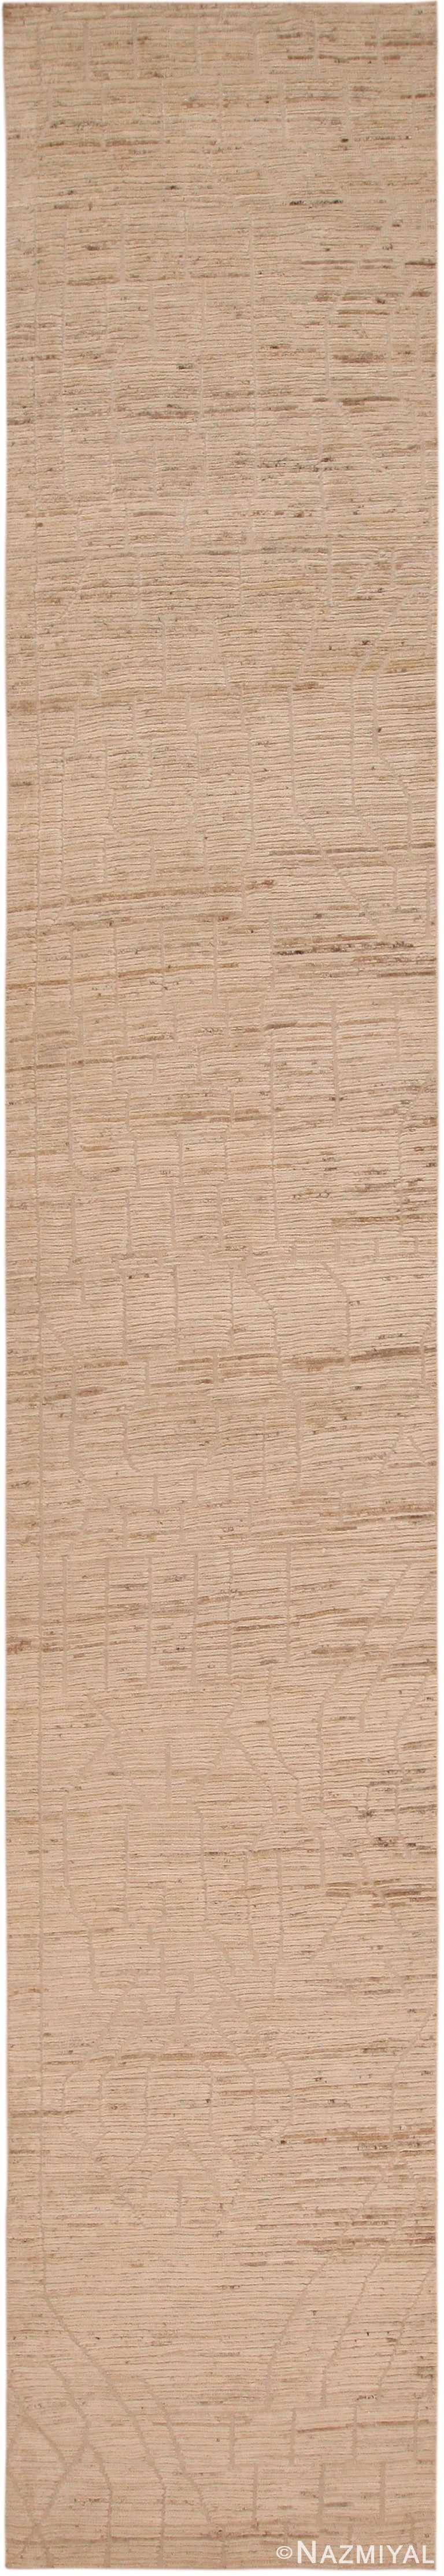 Cream Color Modern Moroccan Design Runner 61060 by Nazmiyal Antique Rugs